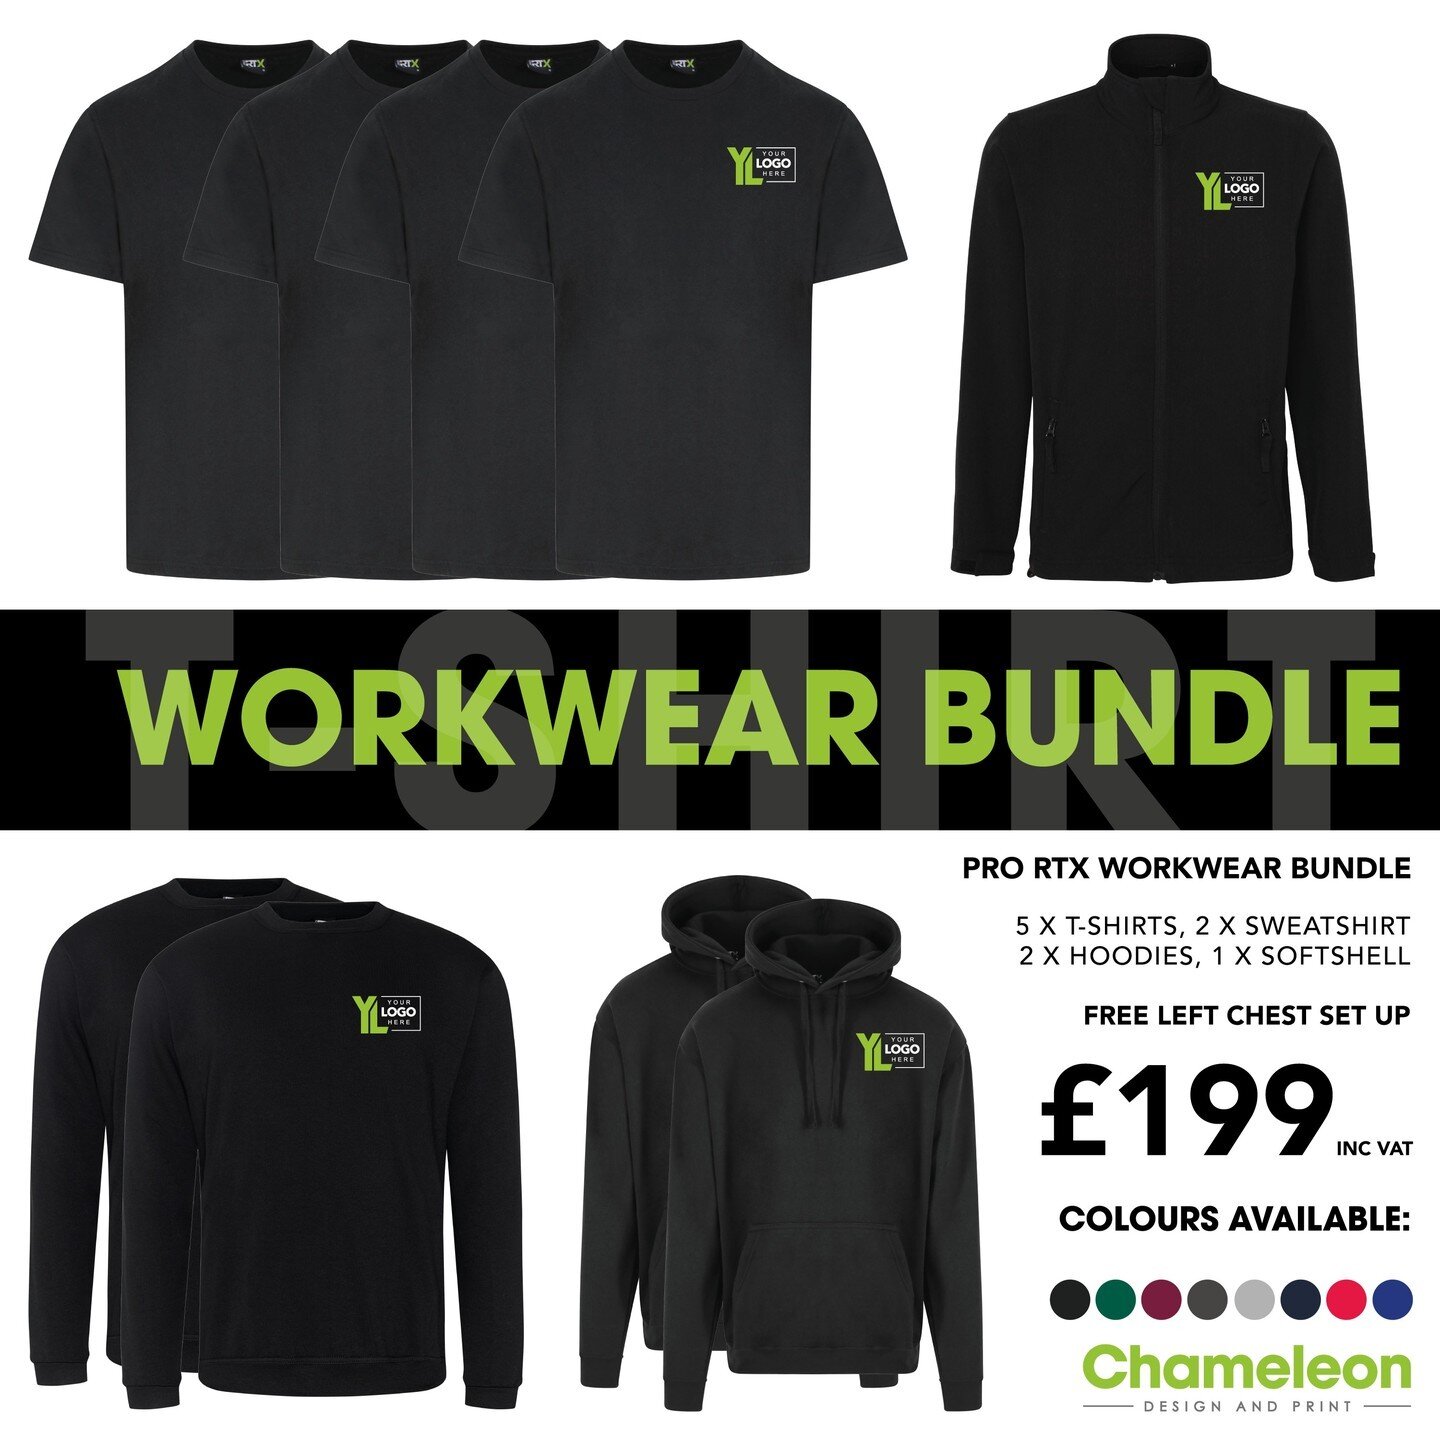 ⭐️ SPECIAL OFFER ⭐️ Grab this incredible branded Summer Pro RTX Workwear Bundle for just &pound;199 incl. VAT! Look smart &amp; professional this Summer with this amazing deal, customised to suit your brand! 

Available in a number of colour options.